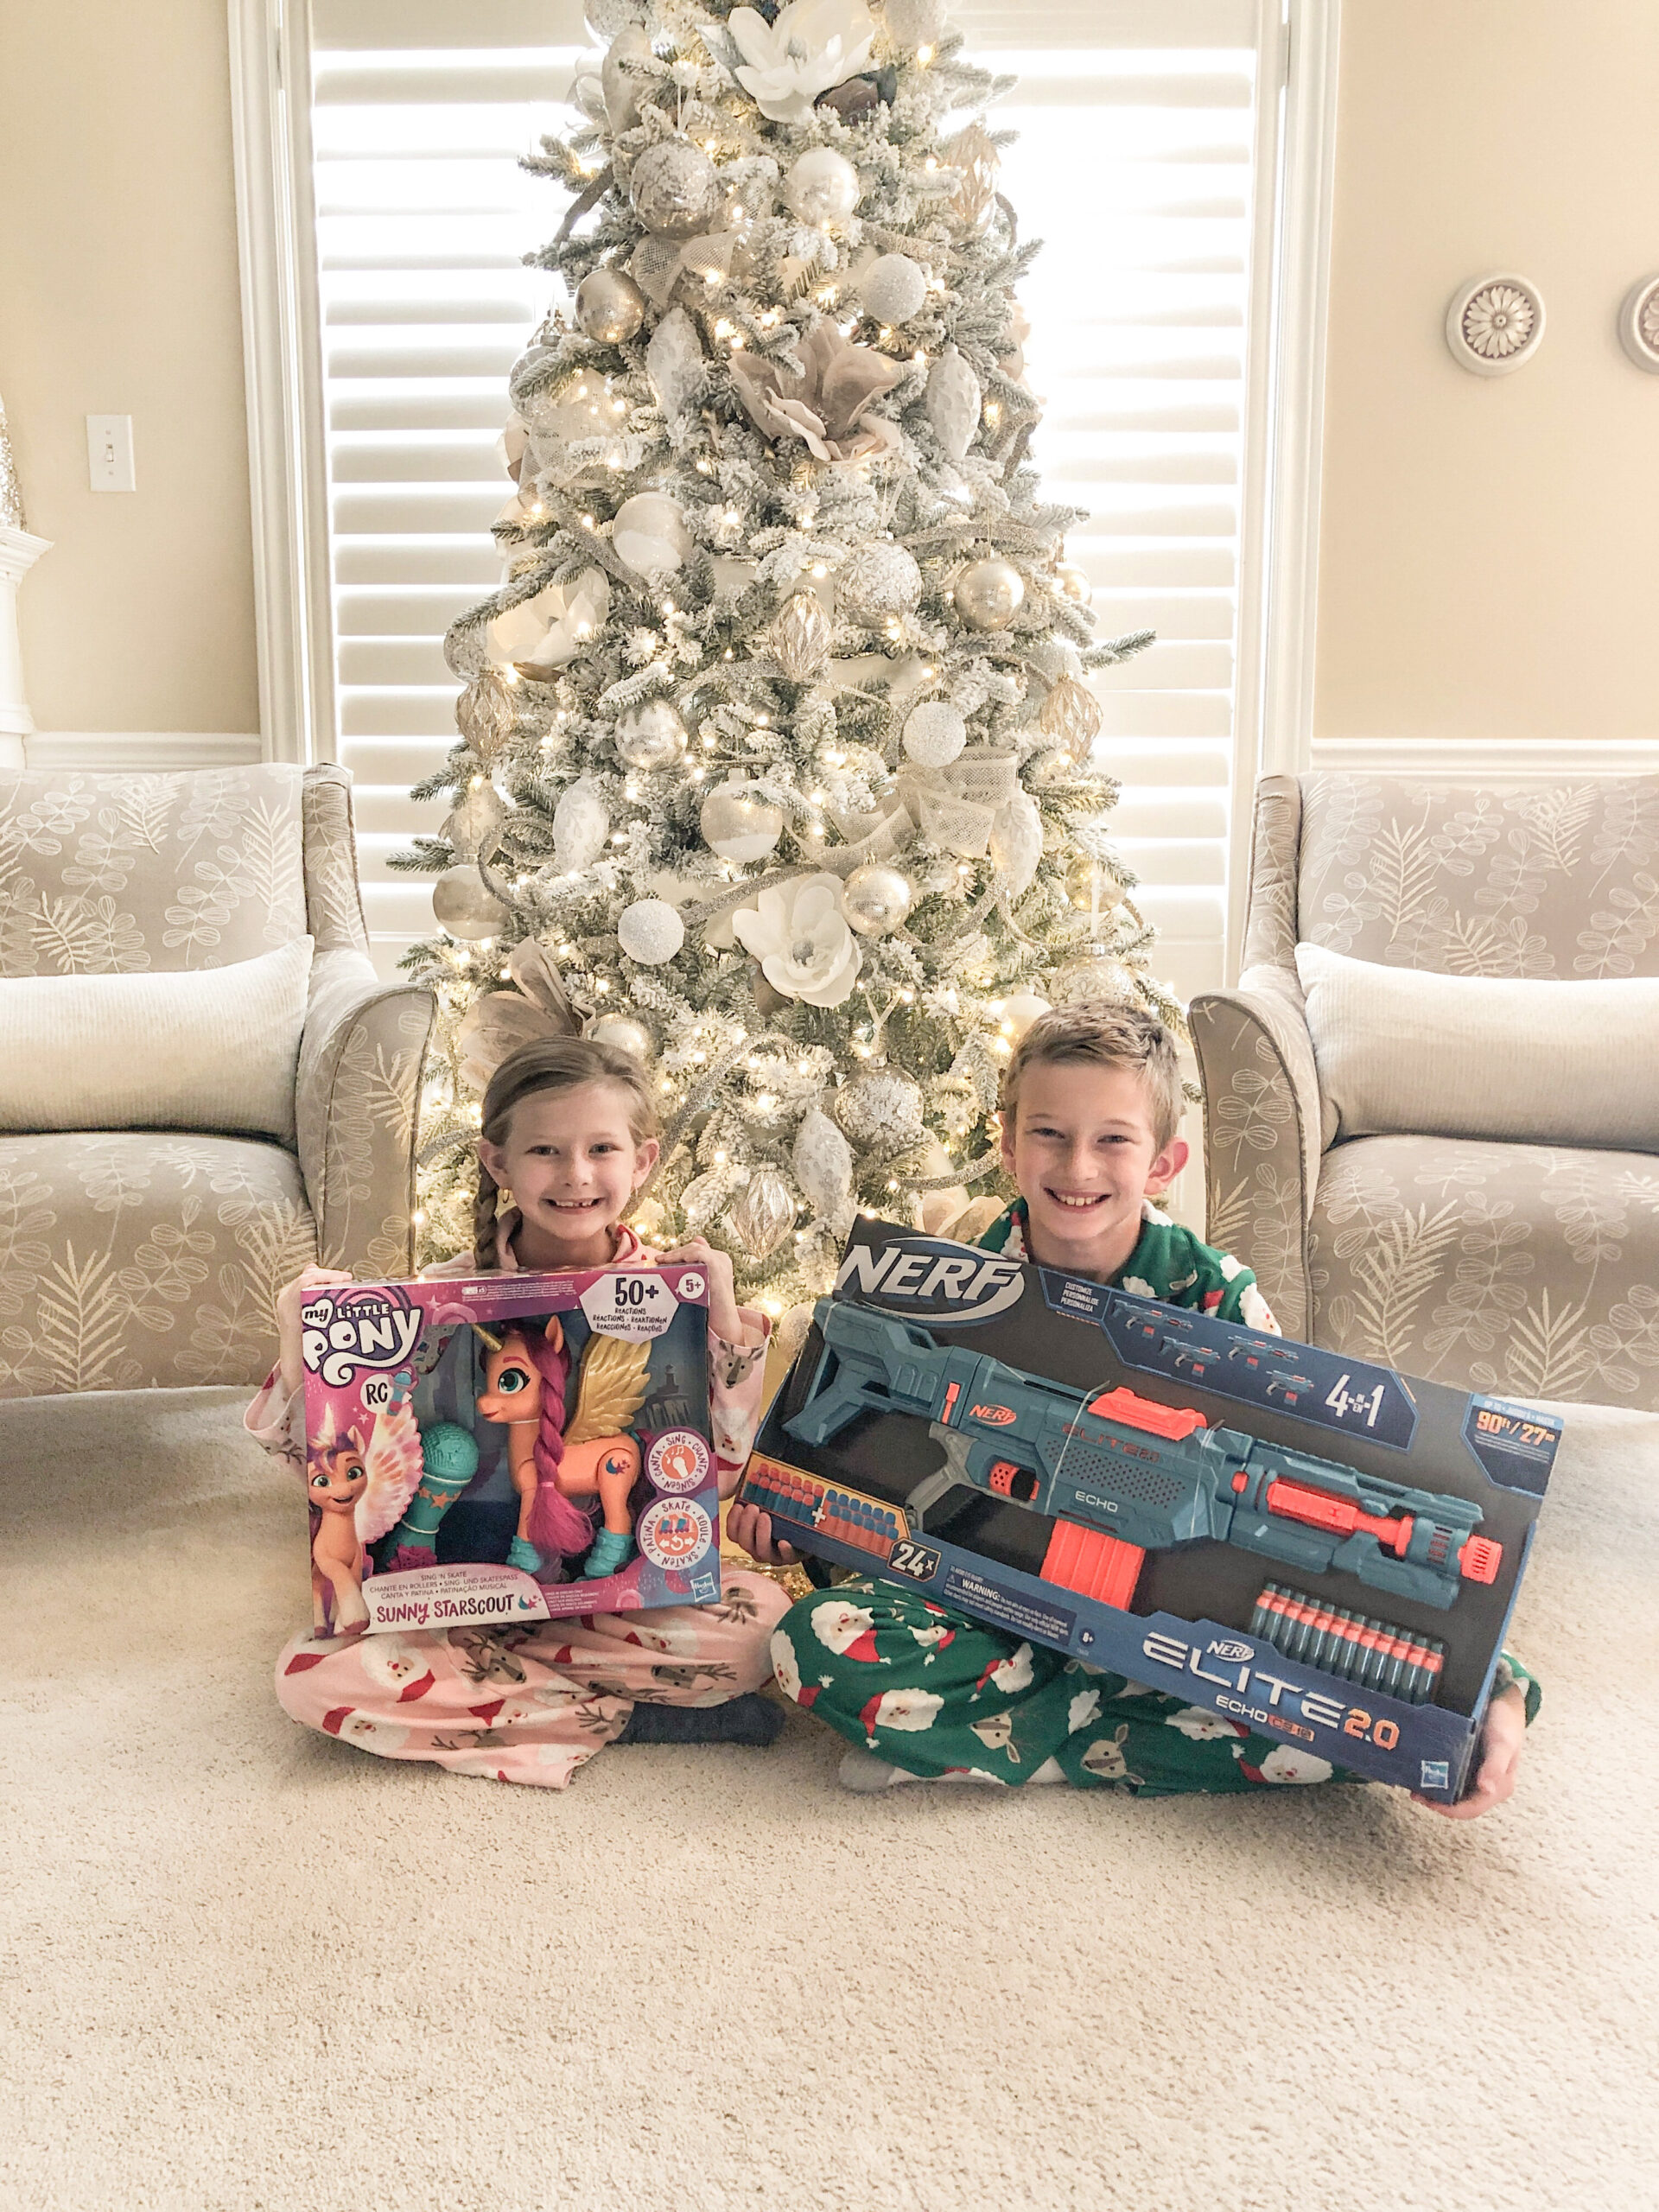 Hasbro Gift Guide for Kids on Livin' Life with Style